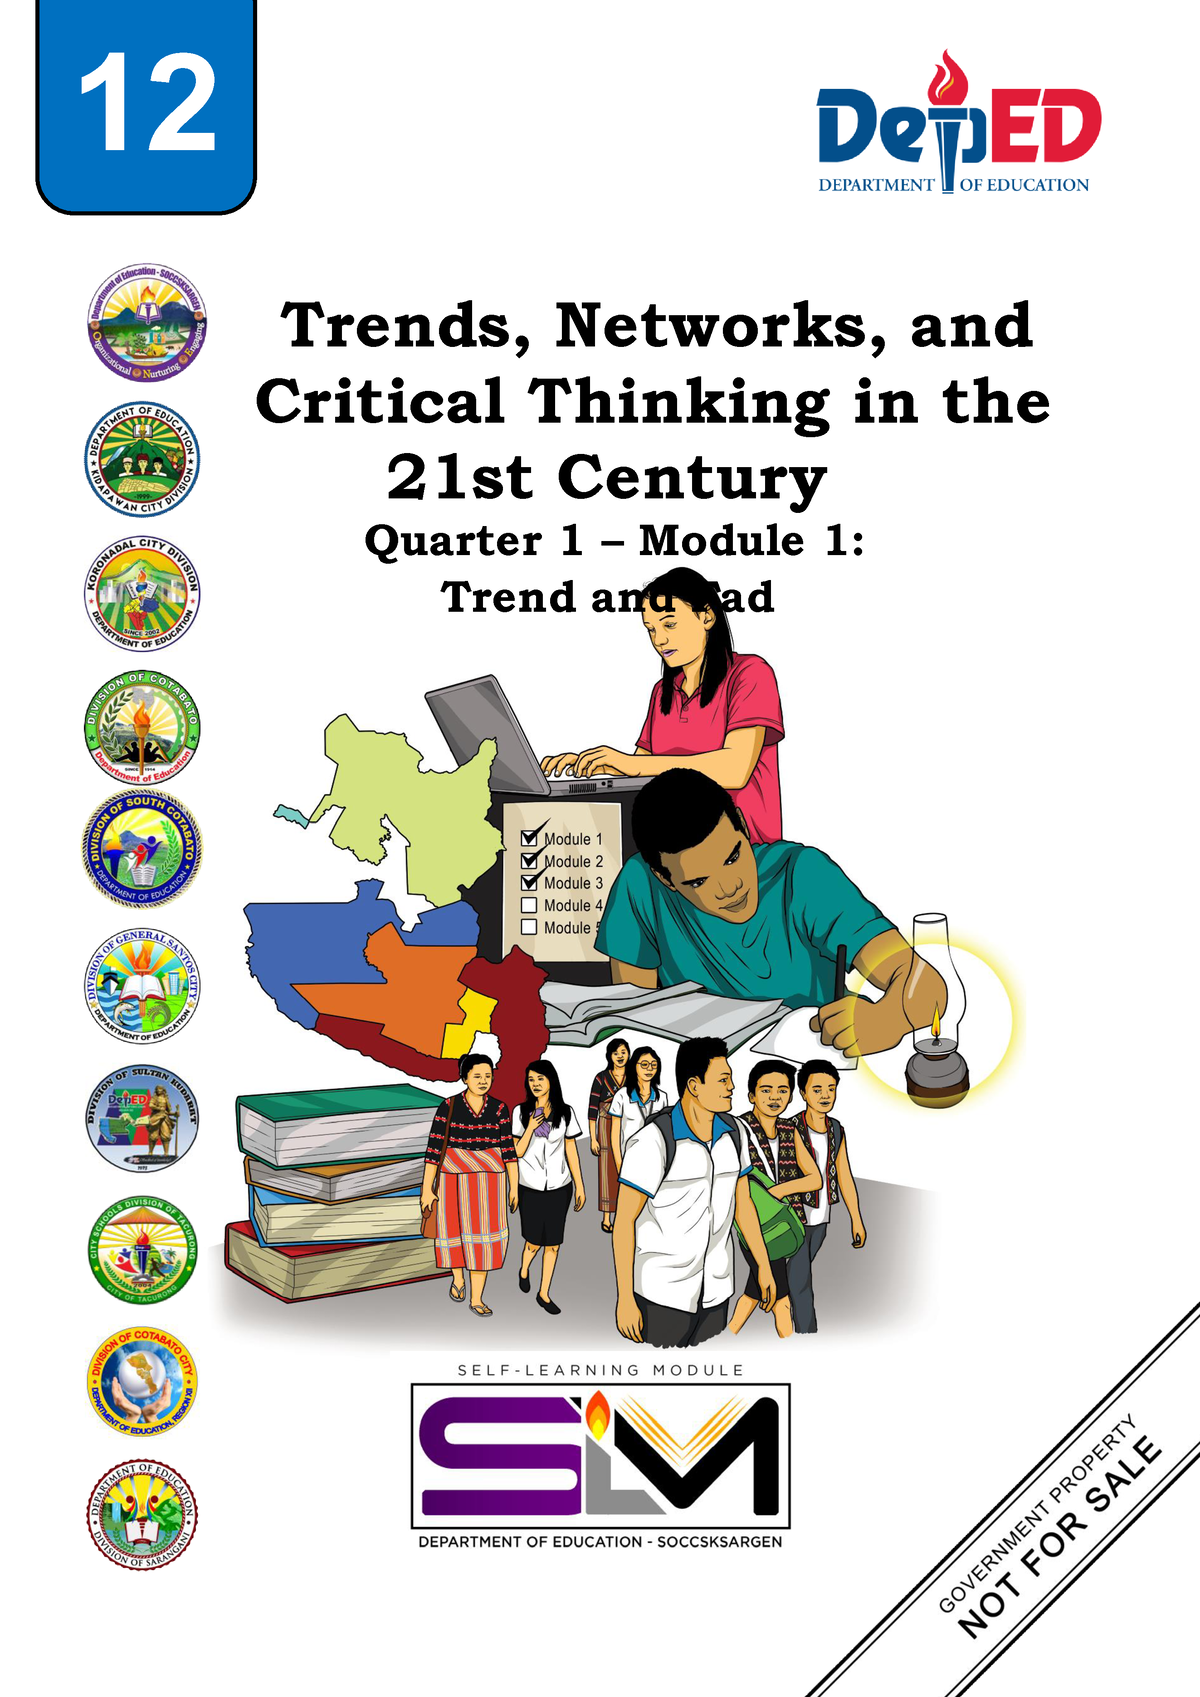 trends and critical thinking in the 21st century culture